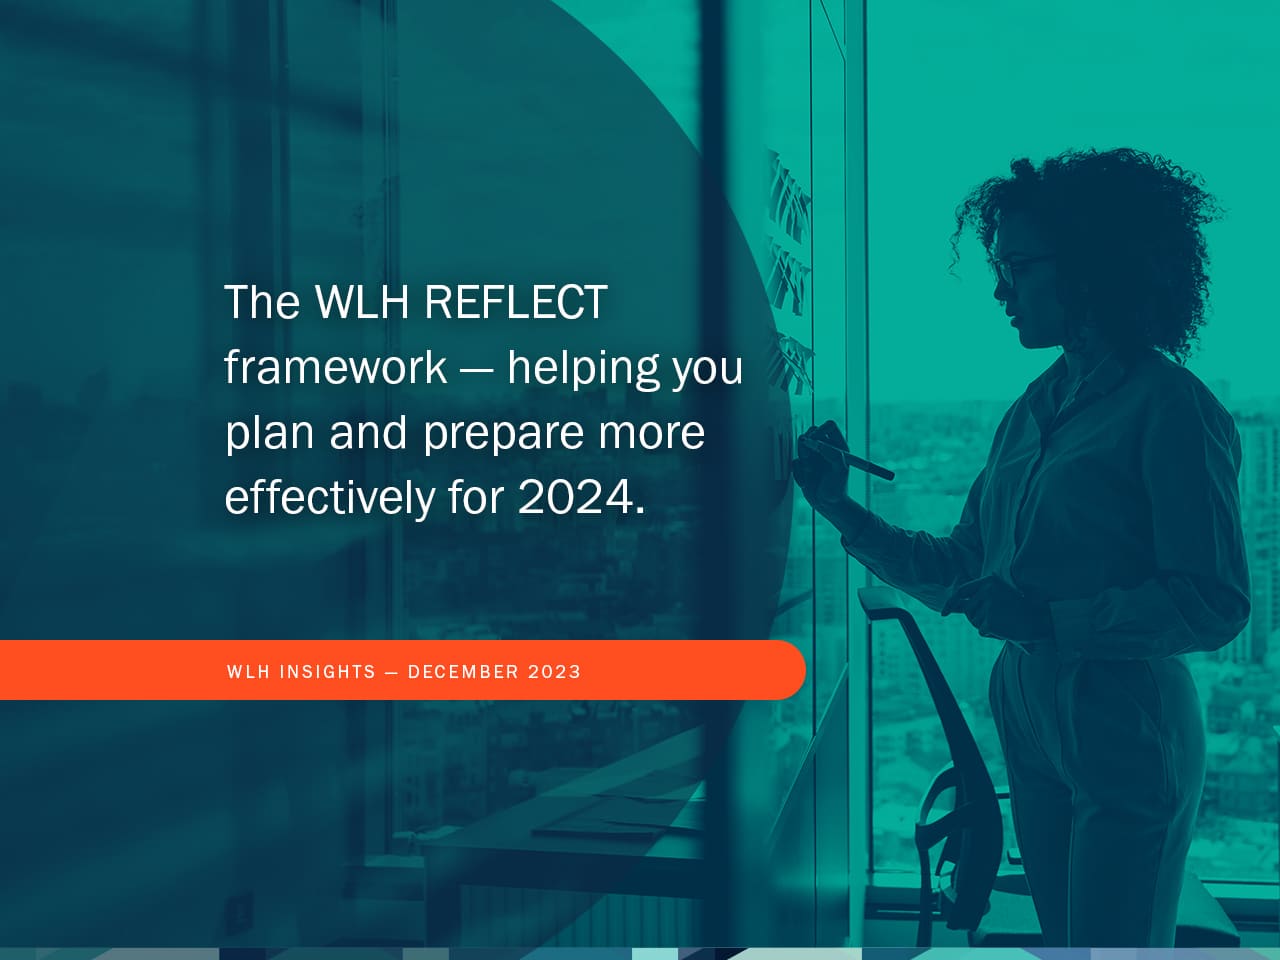 The WLH REFLECT framework — helping you plan and prepare more effectively for 2024.